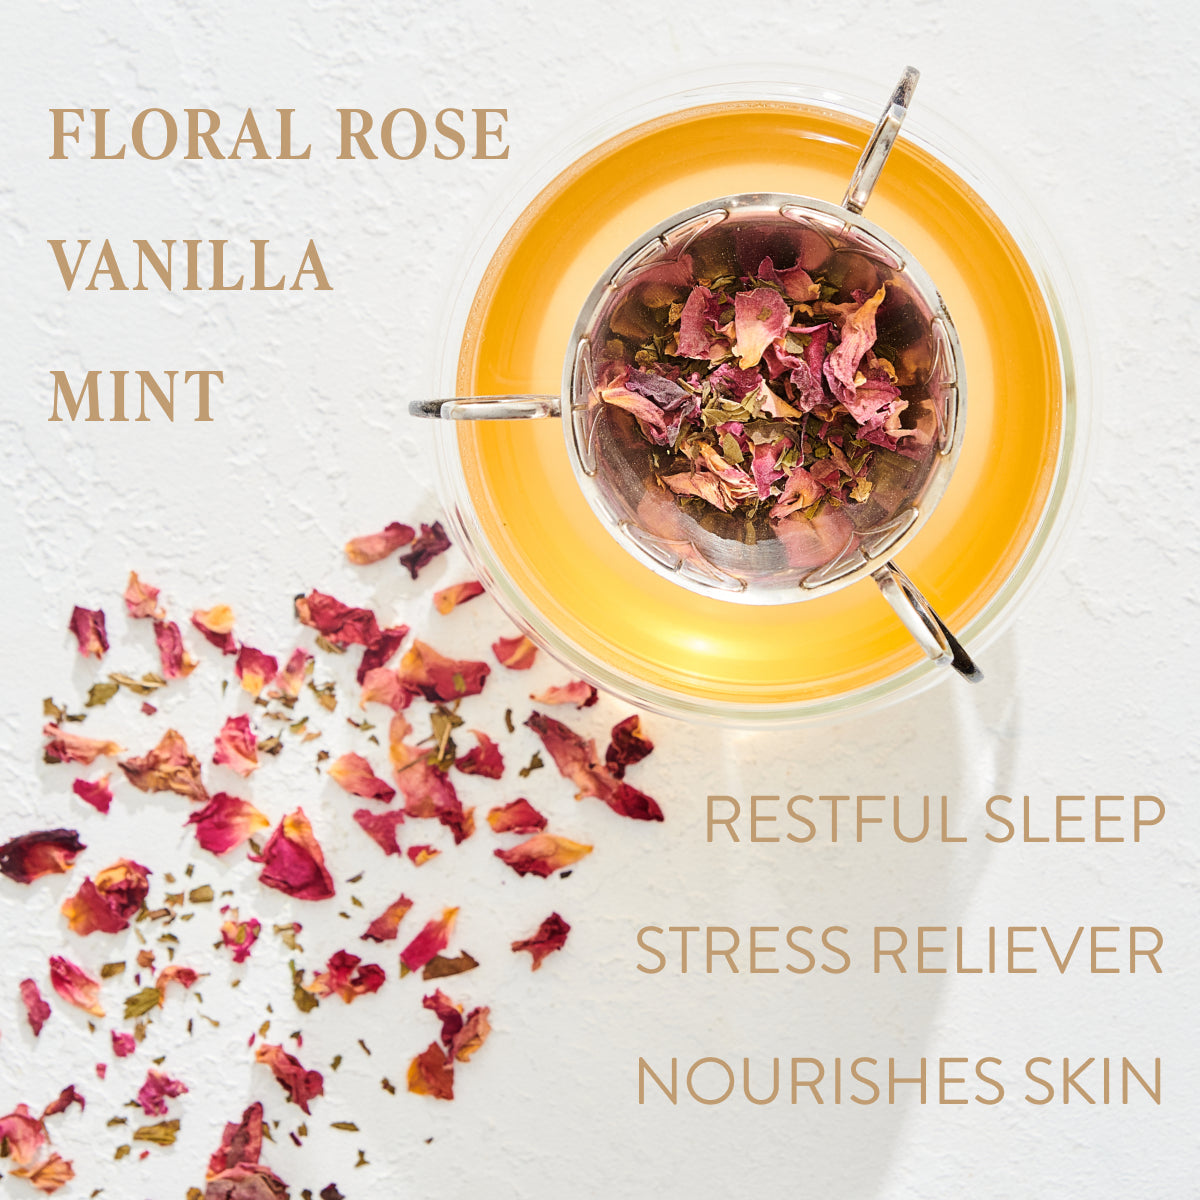 A cup of tea with rose petals in a tea infuser sits on a white surface. Dried rose petals are scattered around the cup. Text on the left reads &quot;FLORAL ROSE VANILLA MINT,&quot; and on the right, &quot;RESTFUL SLEEP STRESS RELIEVER NOURISHES SKIN.&quot; Enjoy this soothing organic loose leaf Mantra Mint™ Herbal Tea from Club Magic Hour.